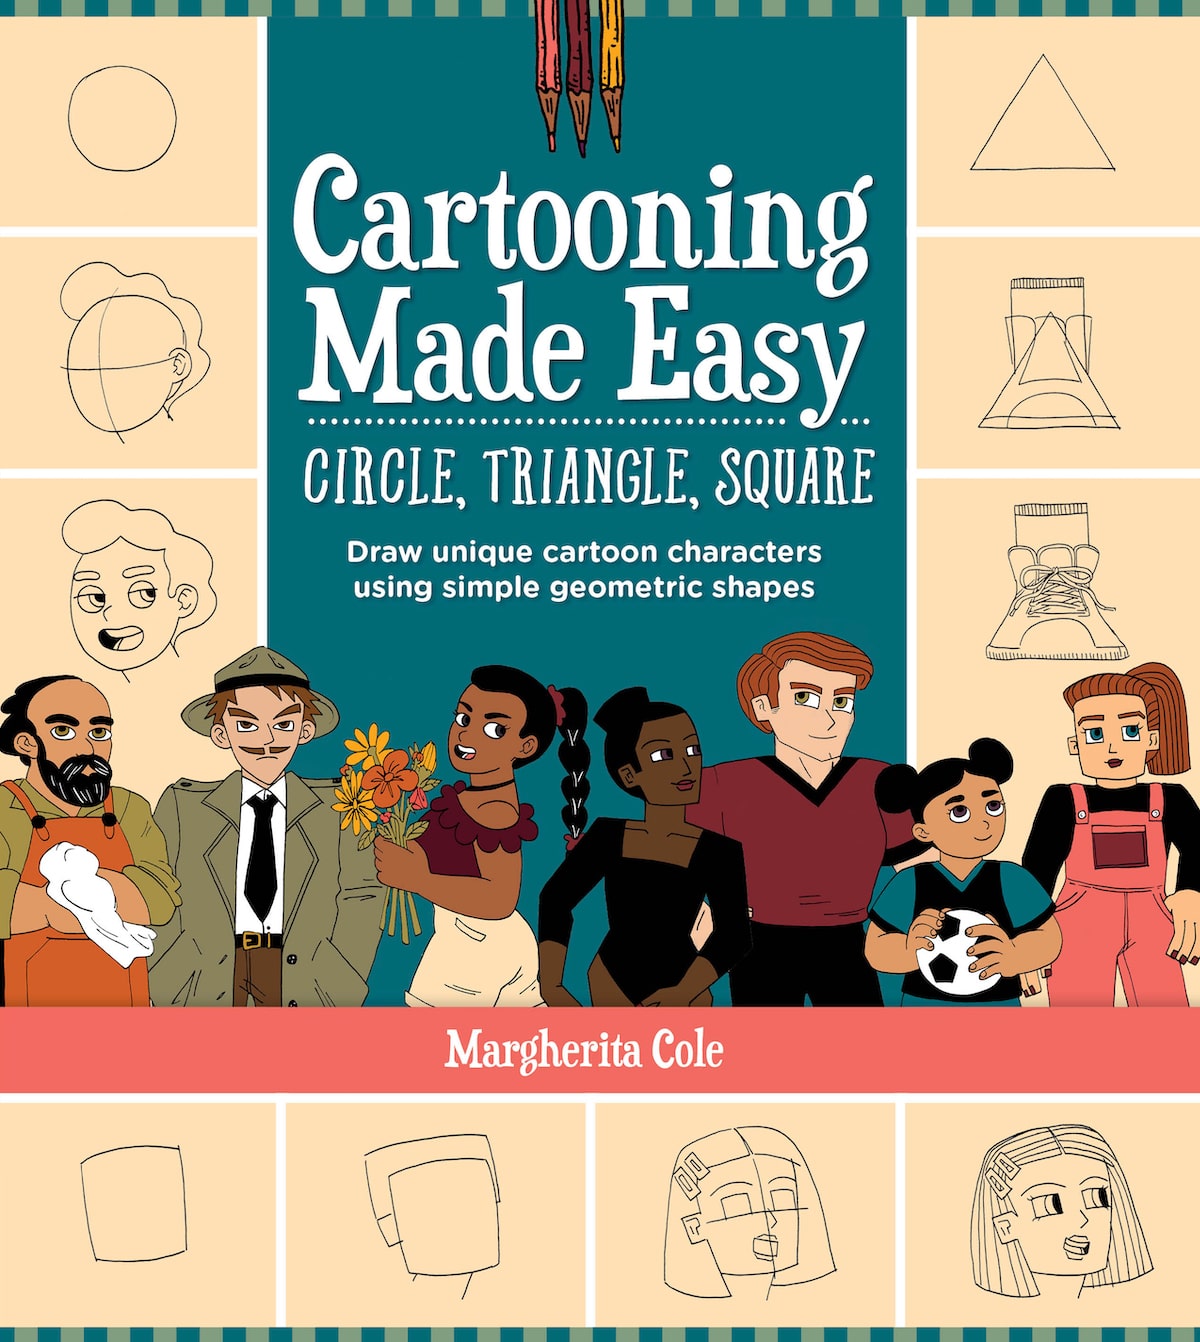 Learn How to Draw Cartoons With 'Cartooning Made Easy'